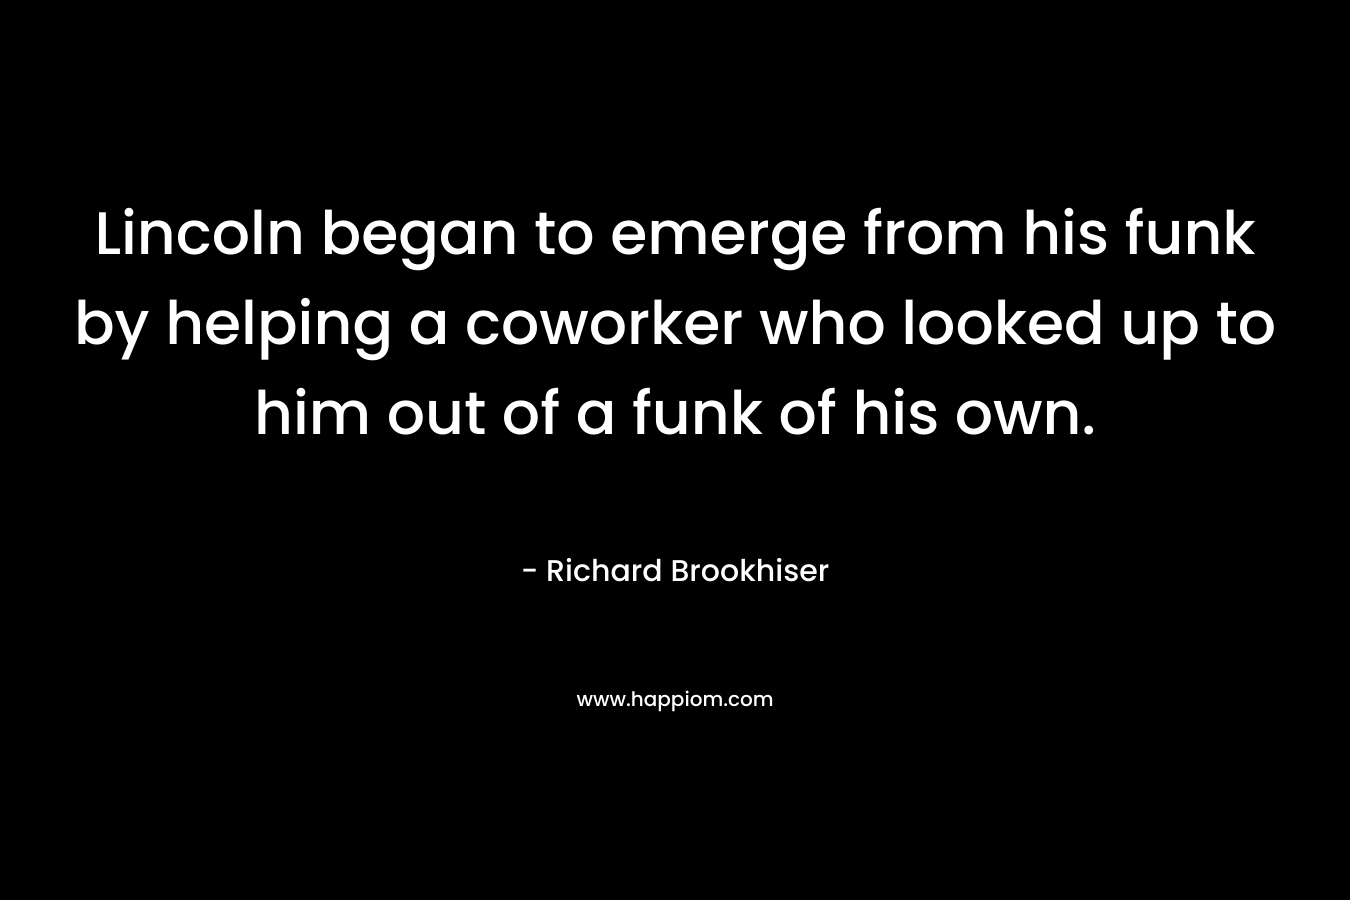 Lincoln began to emerge from his funk by helping a coworker who looked up to him out of a funk of his own. – Richard Brookhiser